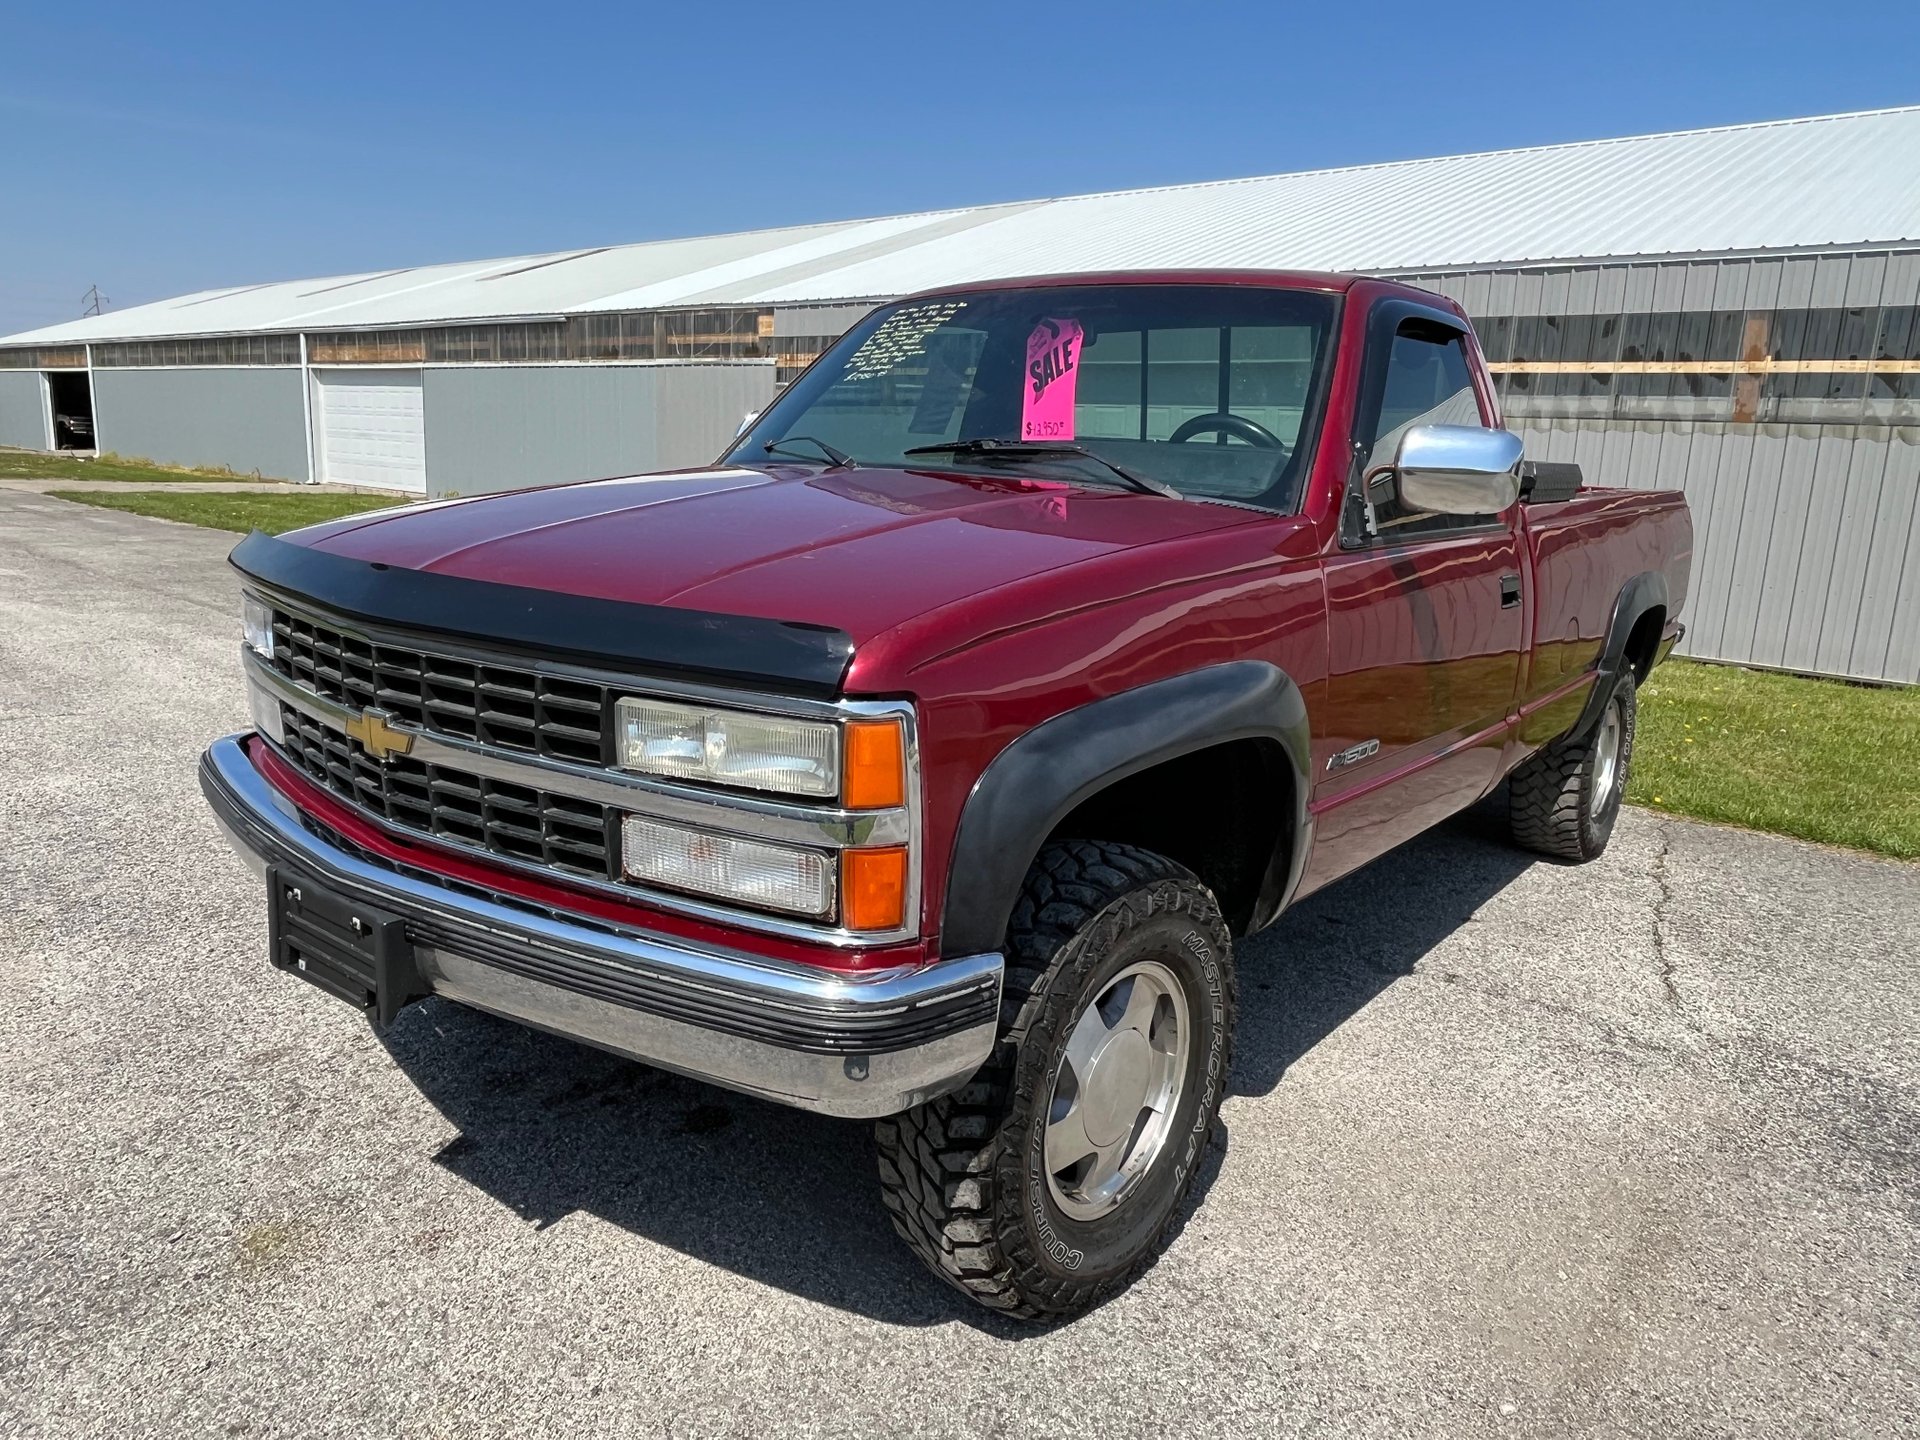 1990 Chevrolet 1500 Pickups | Country Classic Cars